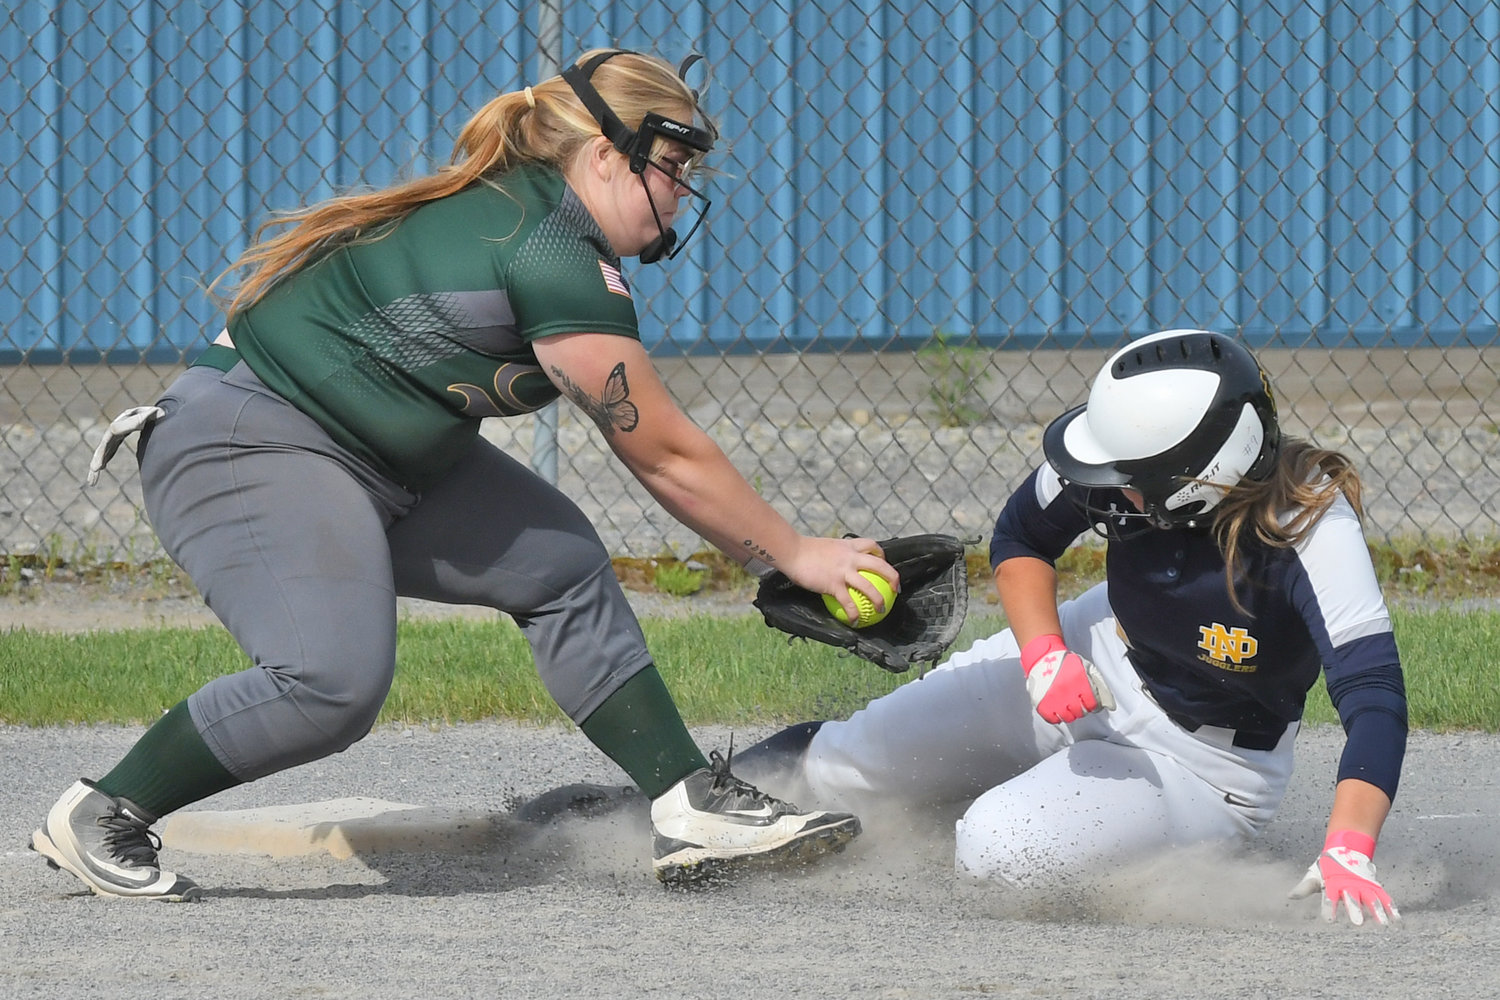 Adirondack’s Ashley Lawrence puts the tag on Utica Notre Dame baserunner Sam Paparella in the teams’ Section III Class C first round playoff game. The visiting Jugglers of Notre Dame won 5-1 to advance to Tuesday’s second round game against top seed Port Pyron. Results were not available for that game at press time. In Monday’s win, Paparella had two hits, an RBI and a run scored.